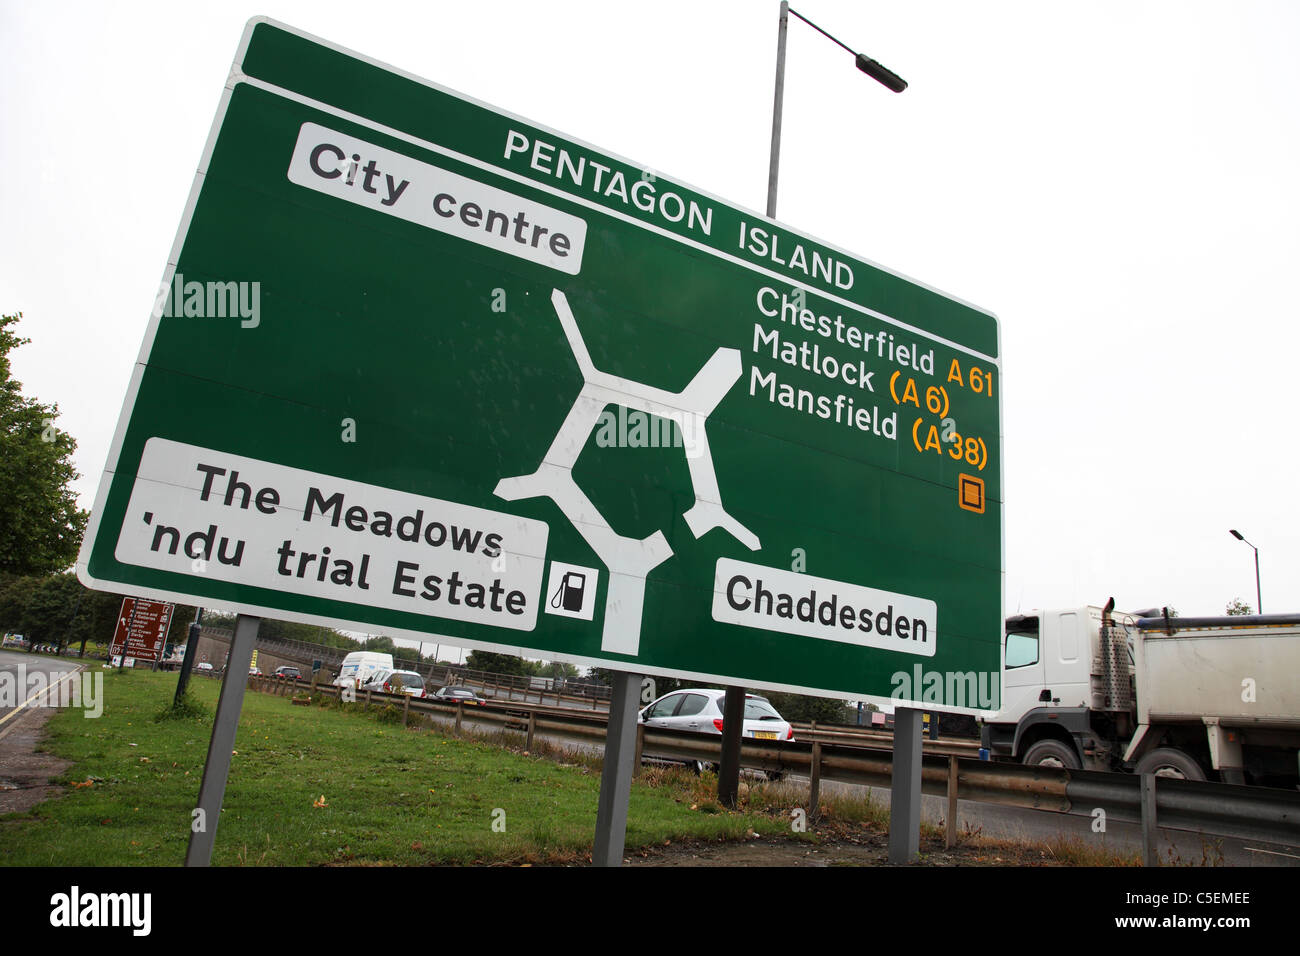 A road sign on the A52 at Pentagon Island, Derby, England, U.K. Stock Photo